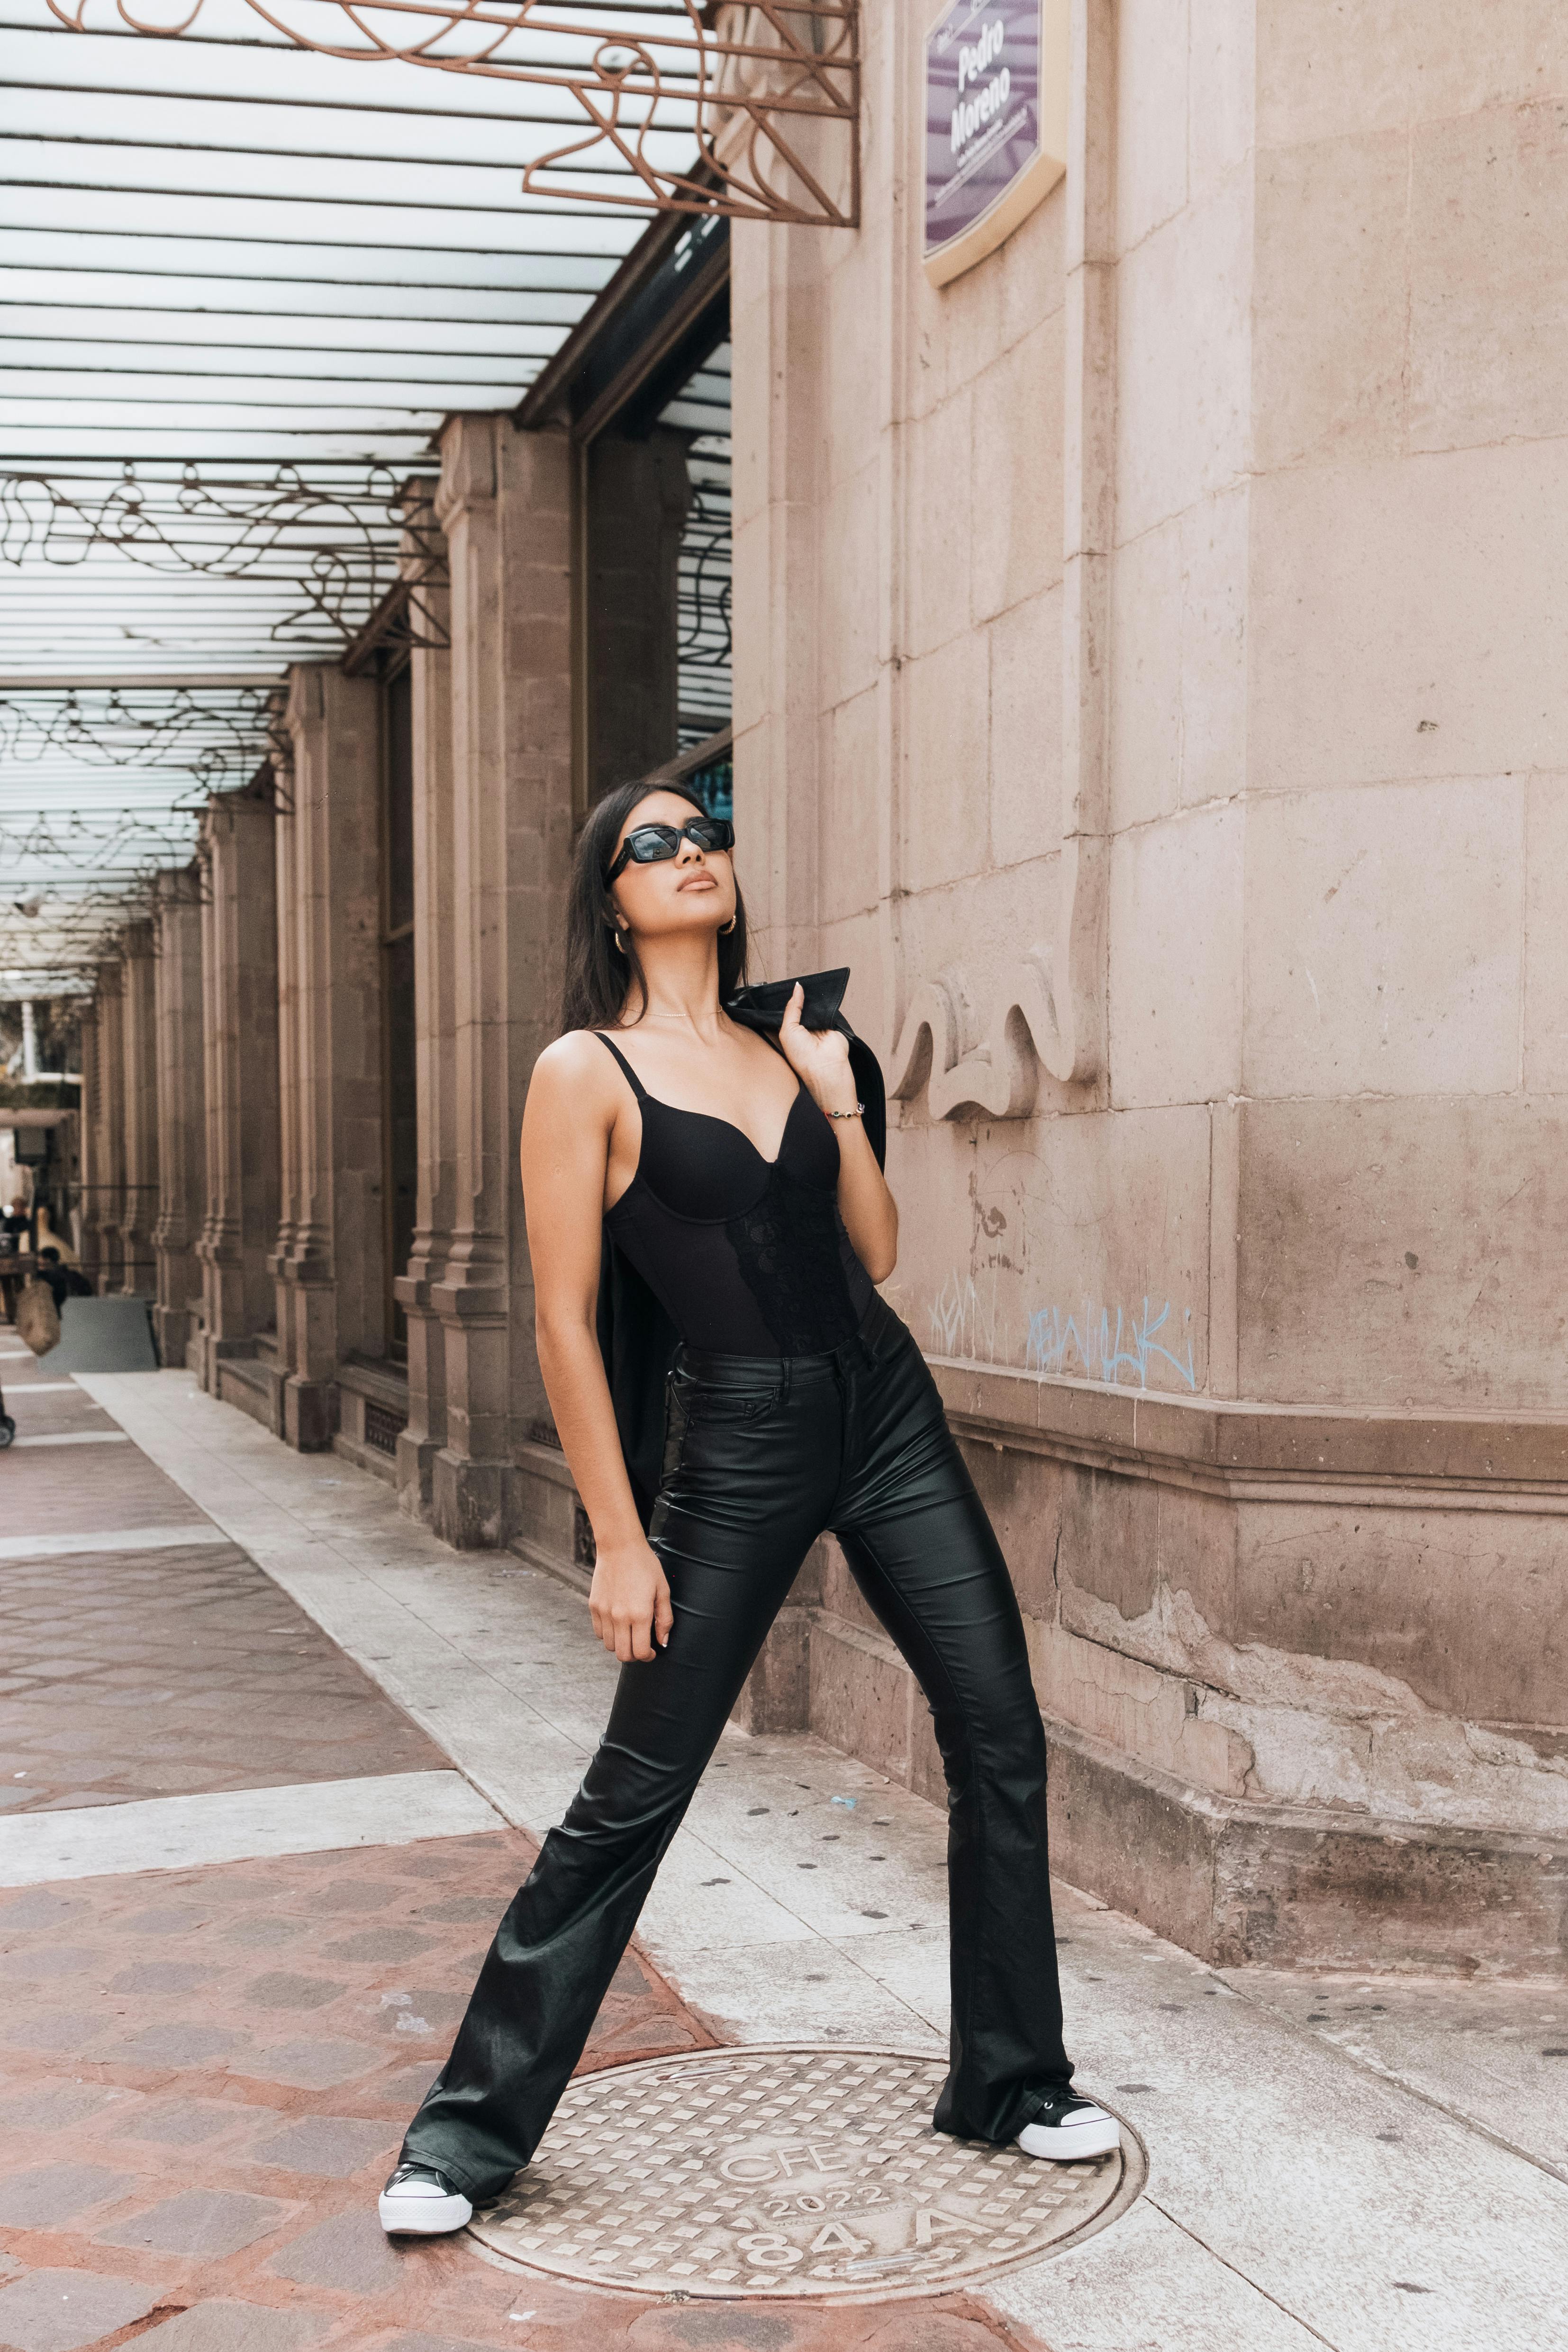 Hipster Outfit. Model Posing in Street, Wearingwearing White Pants,t-shirt,  Black Leather Jacket and Dark Boots . Female Fashion Stock Photo - Image of  lady, freedom: 170868756